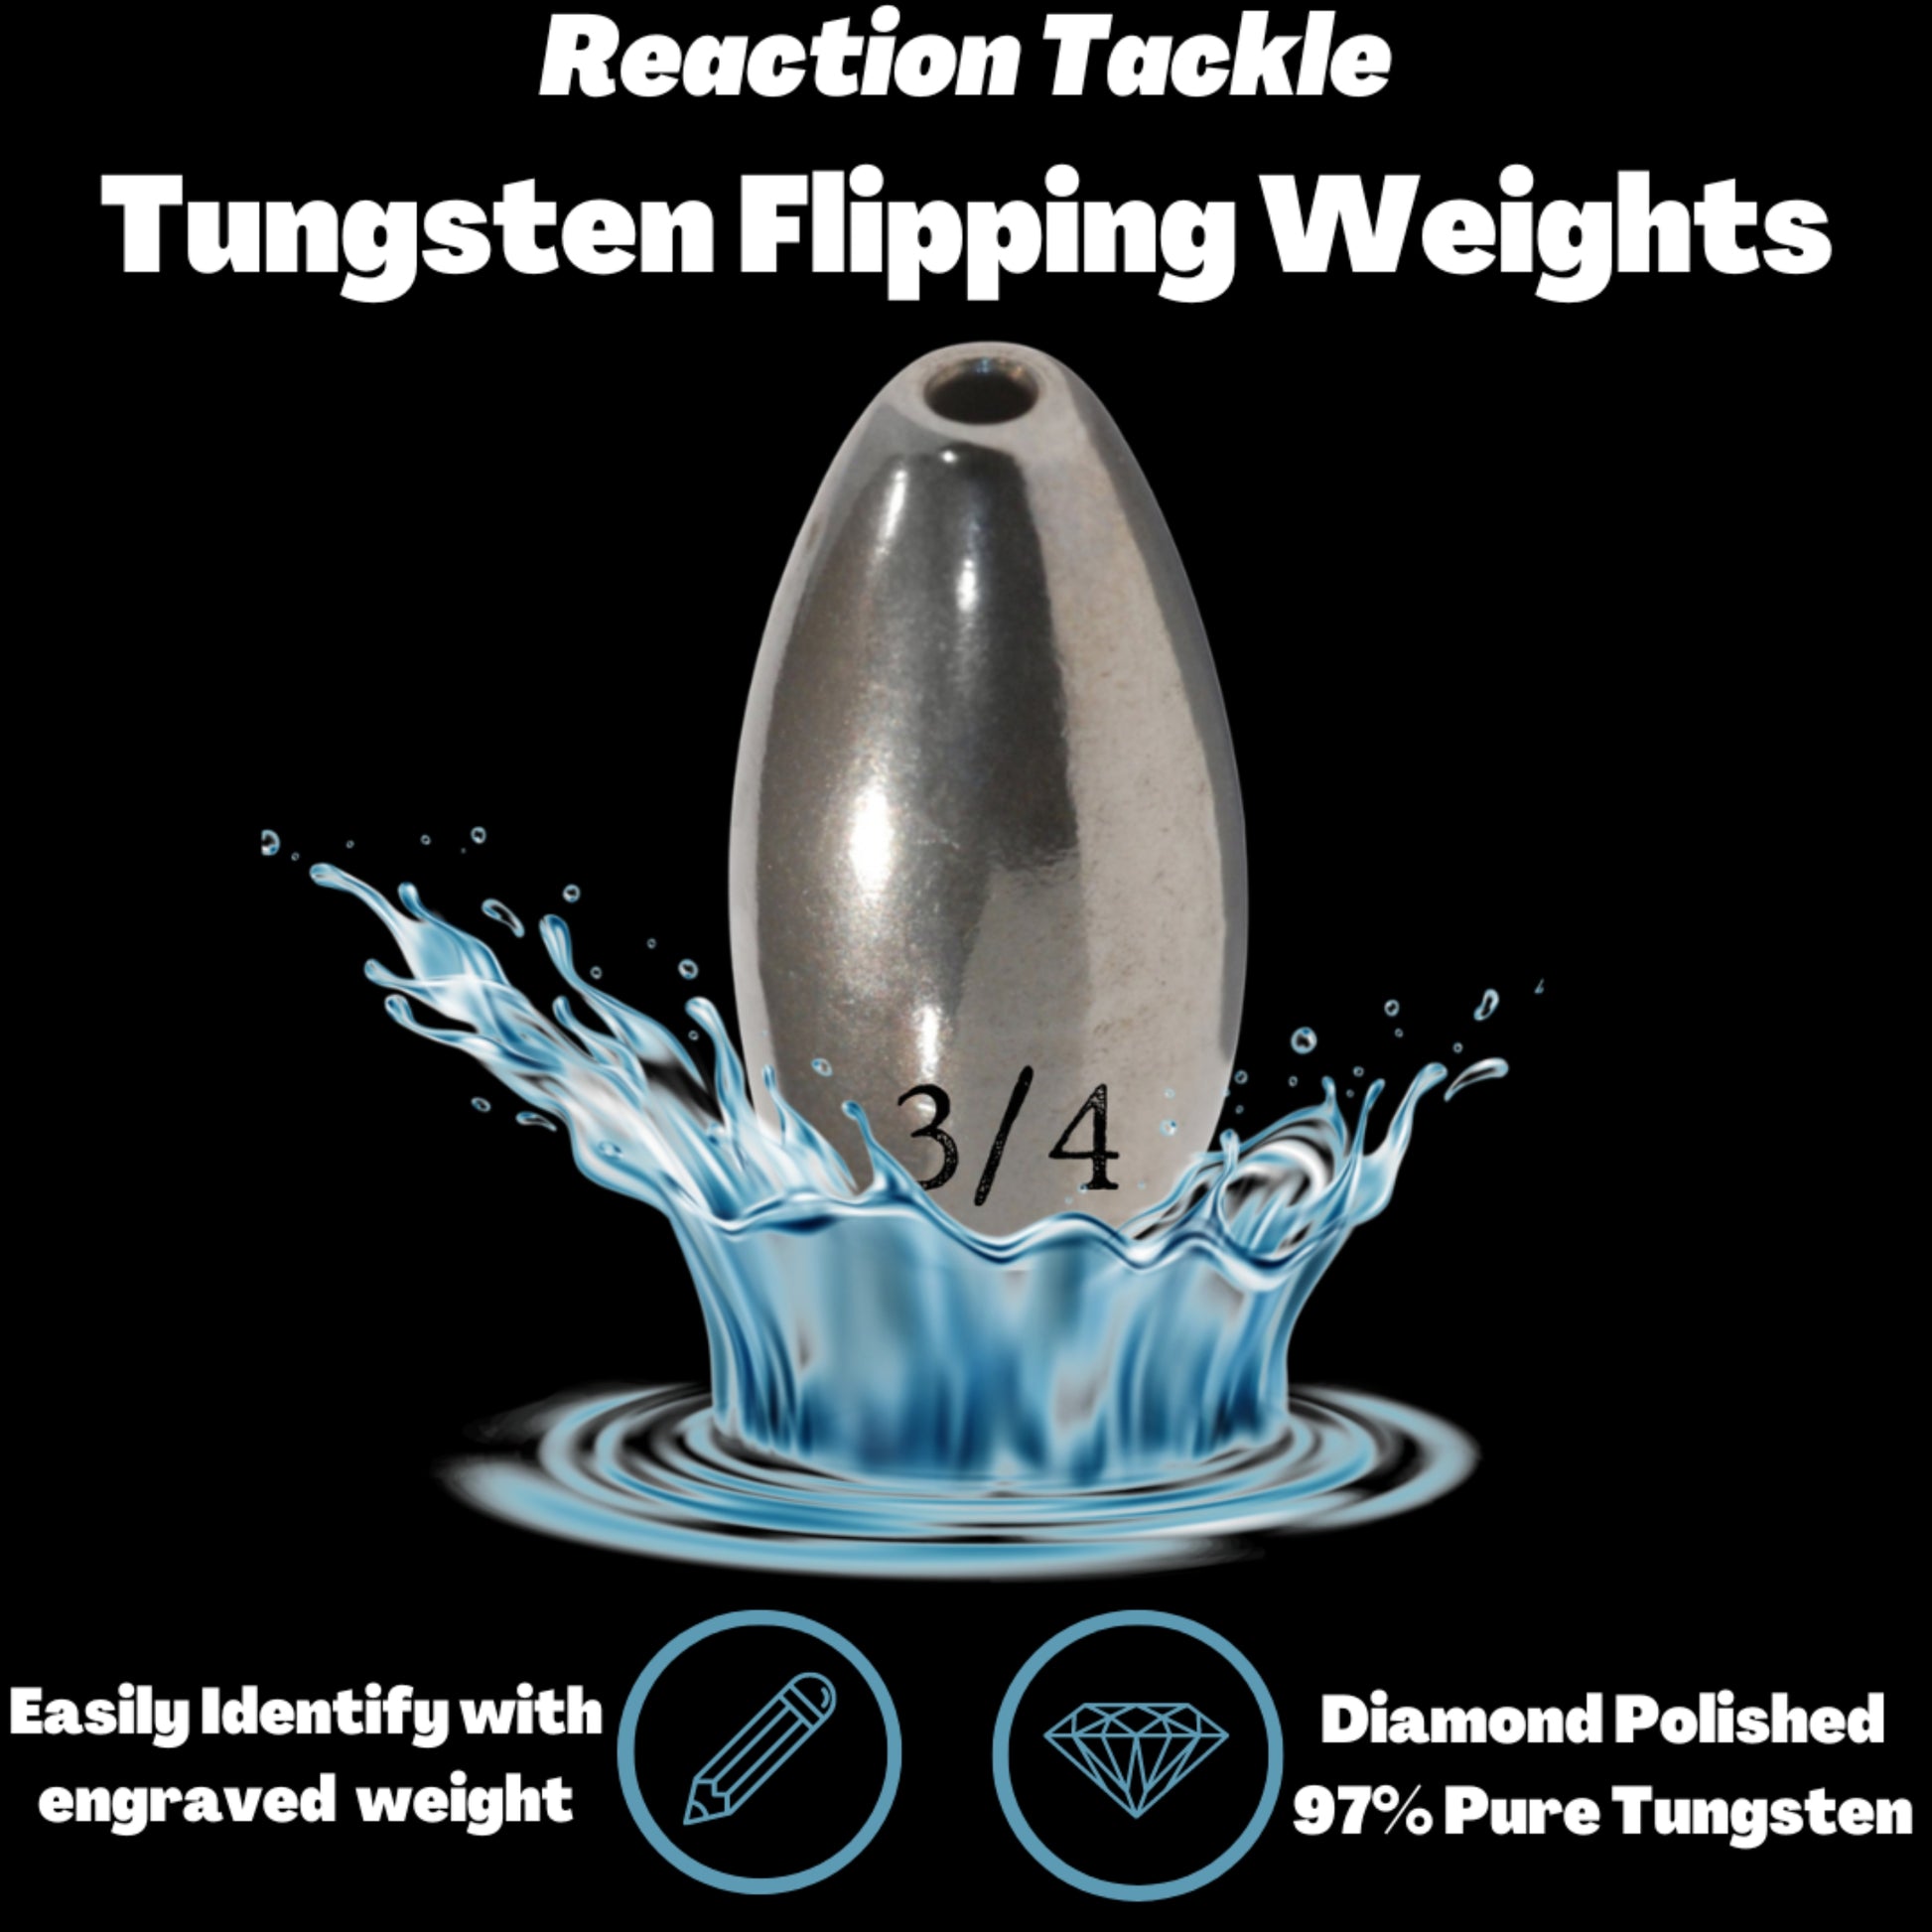 Reaction Tackle Flipping Weights 1/2 Black